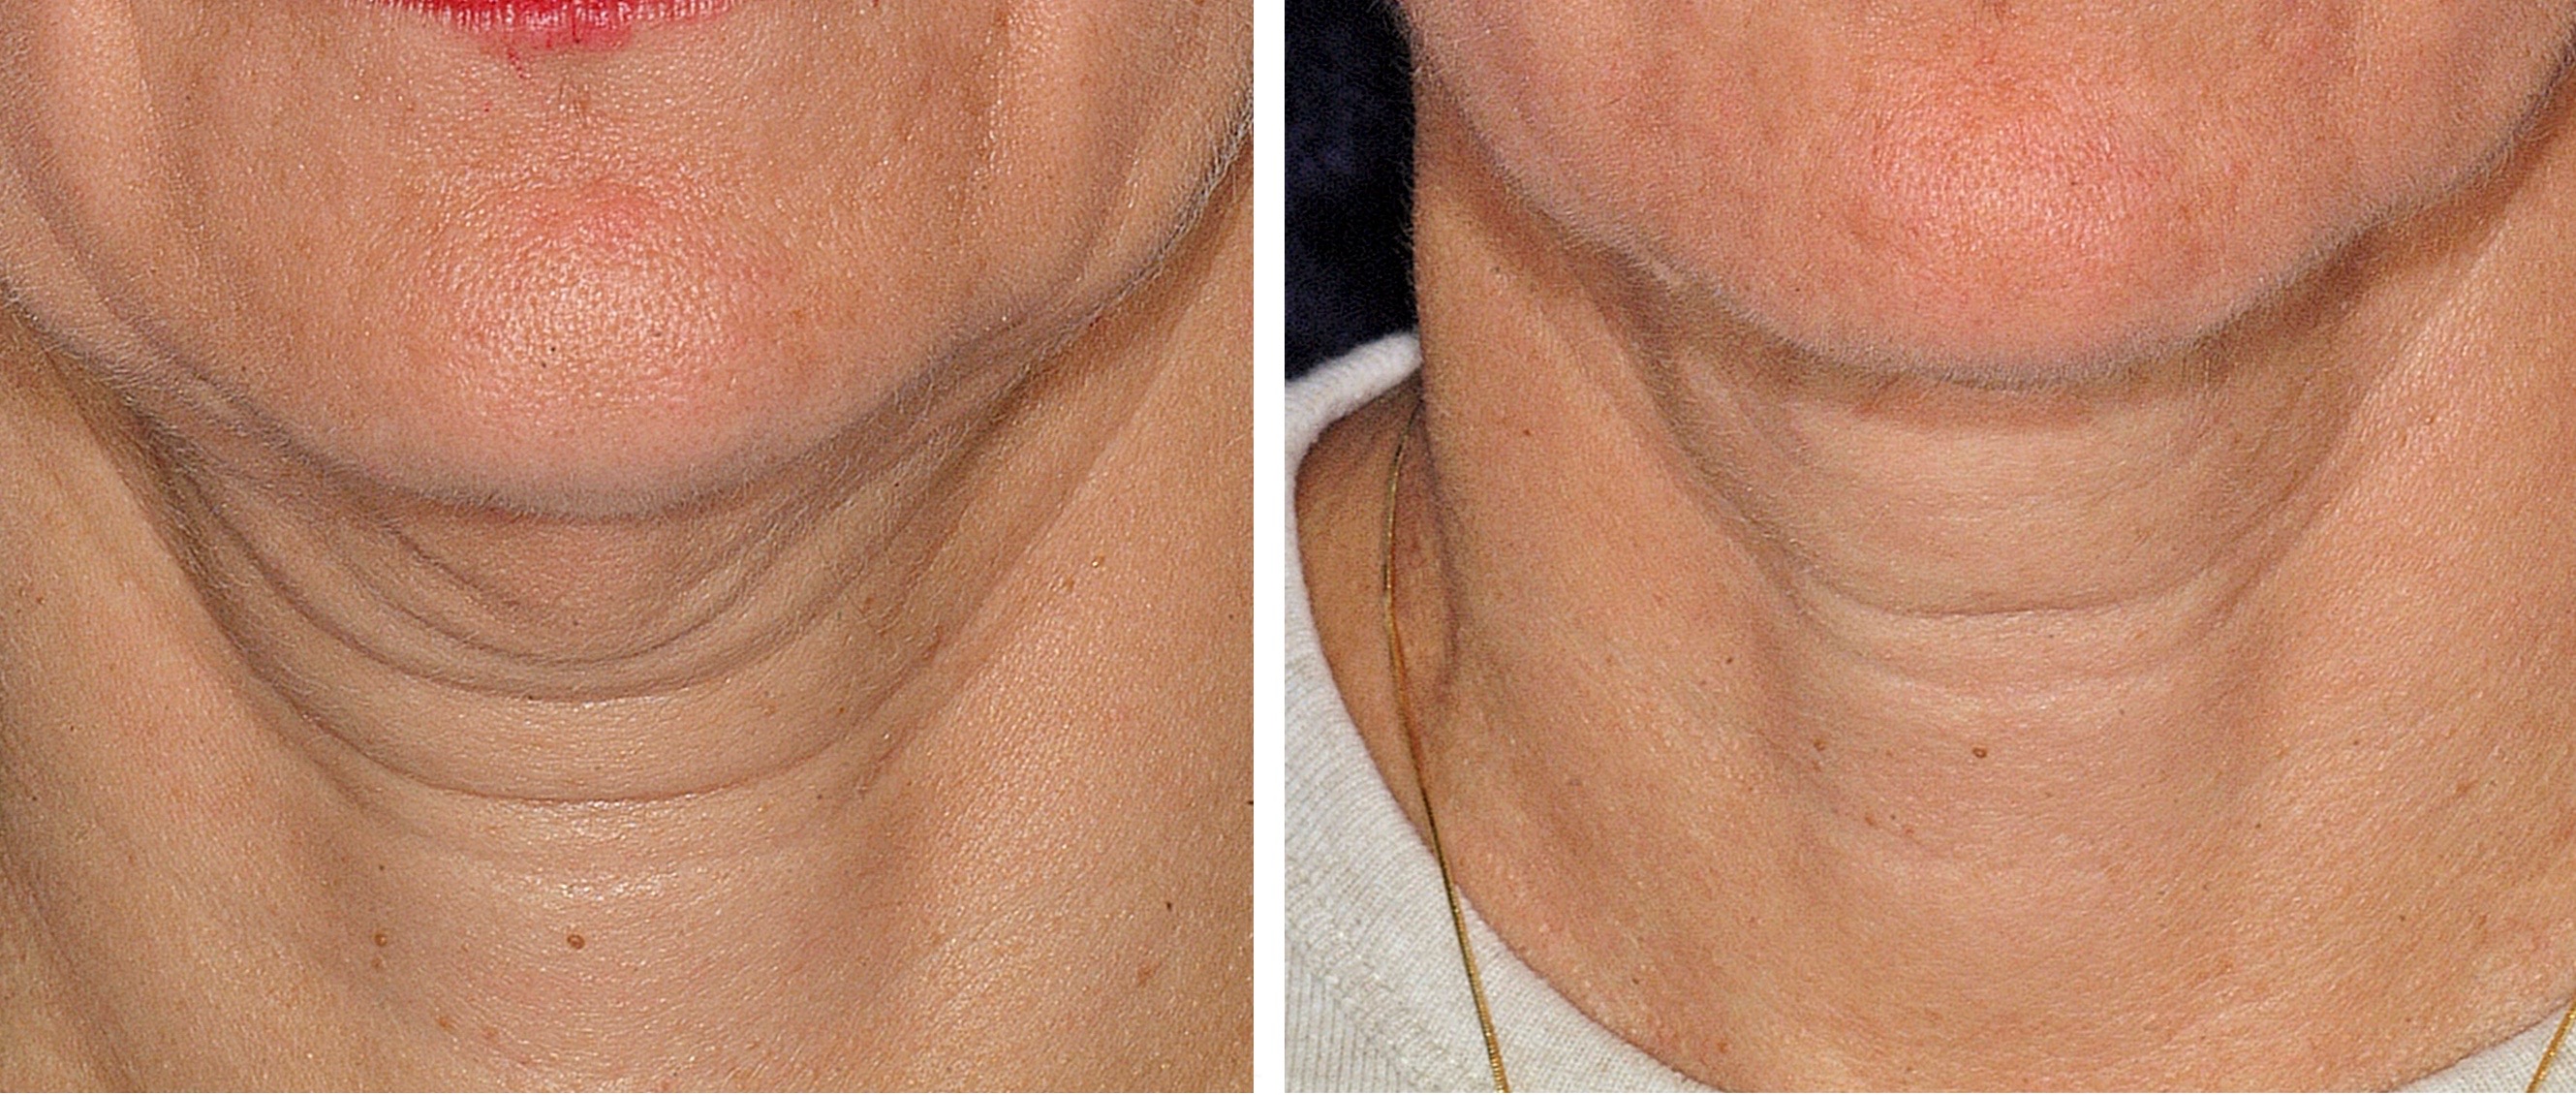 thermage before and after neck jaw line lower face